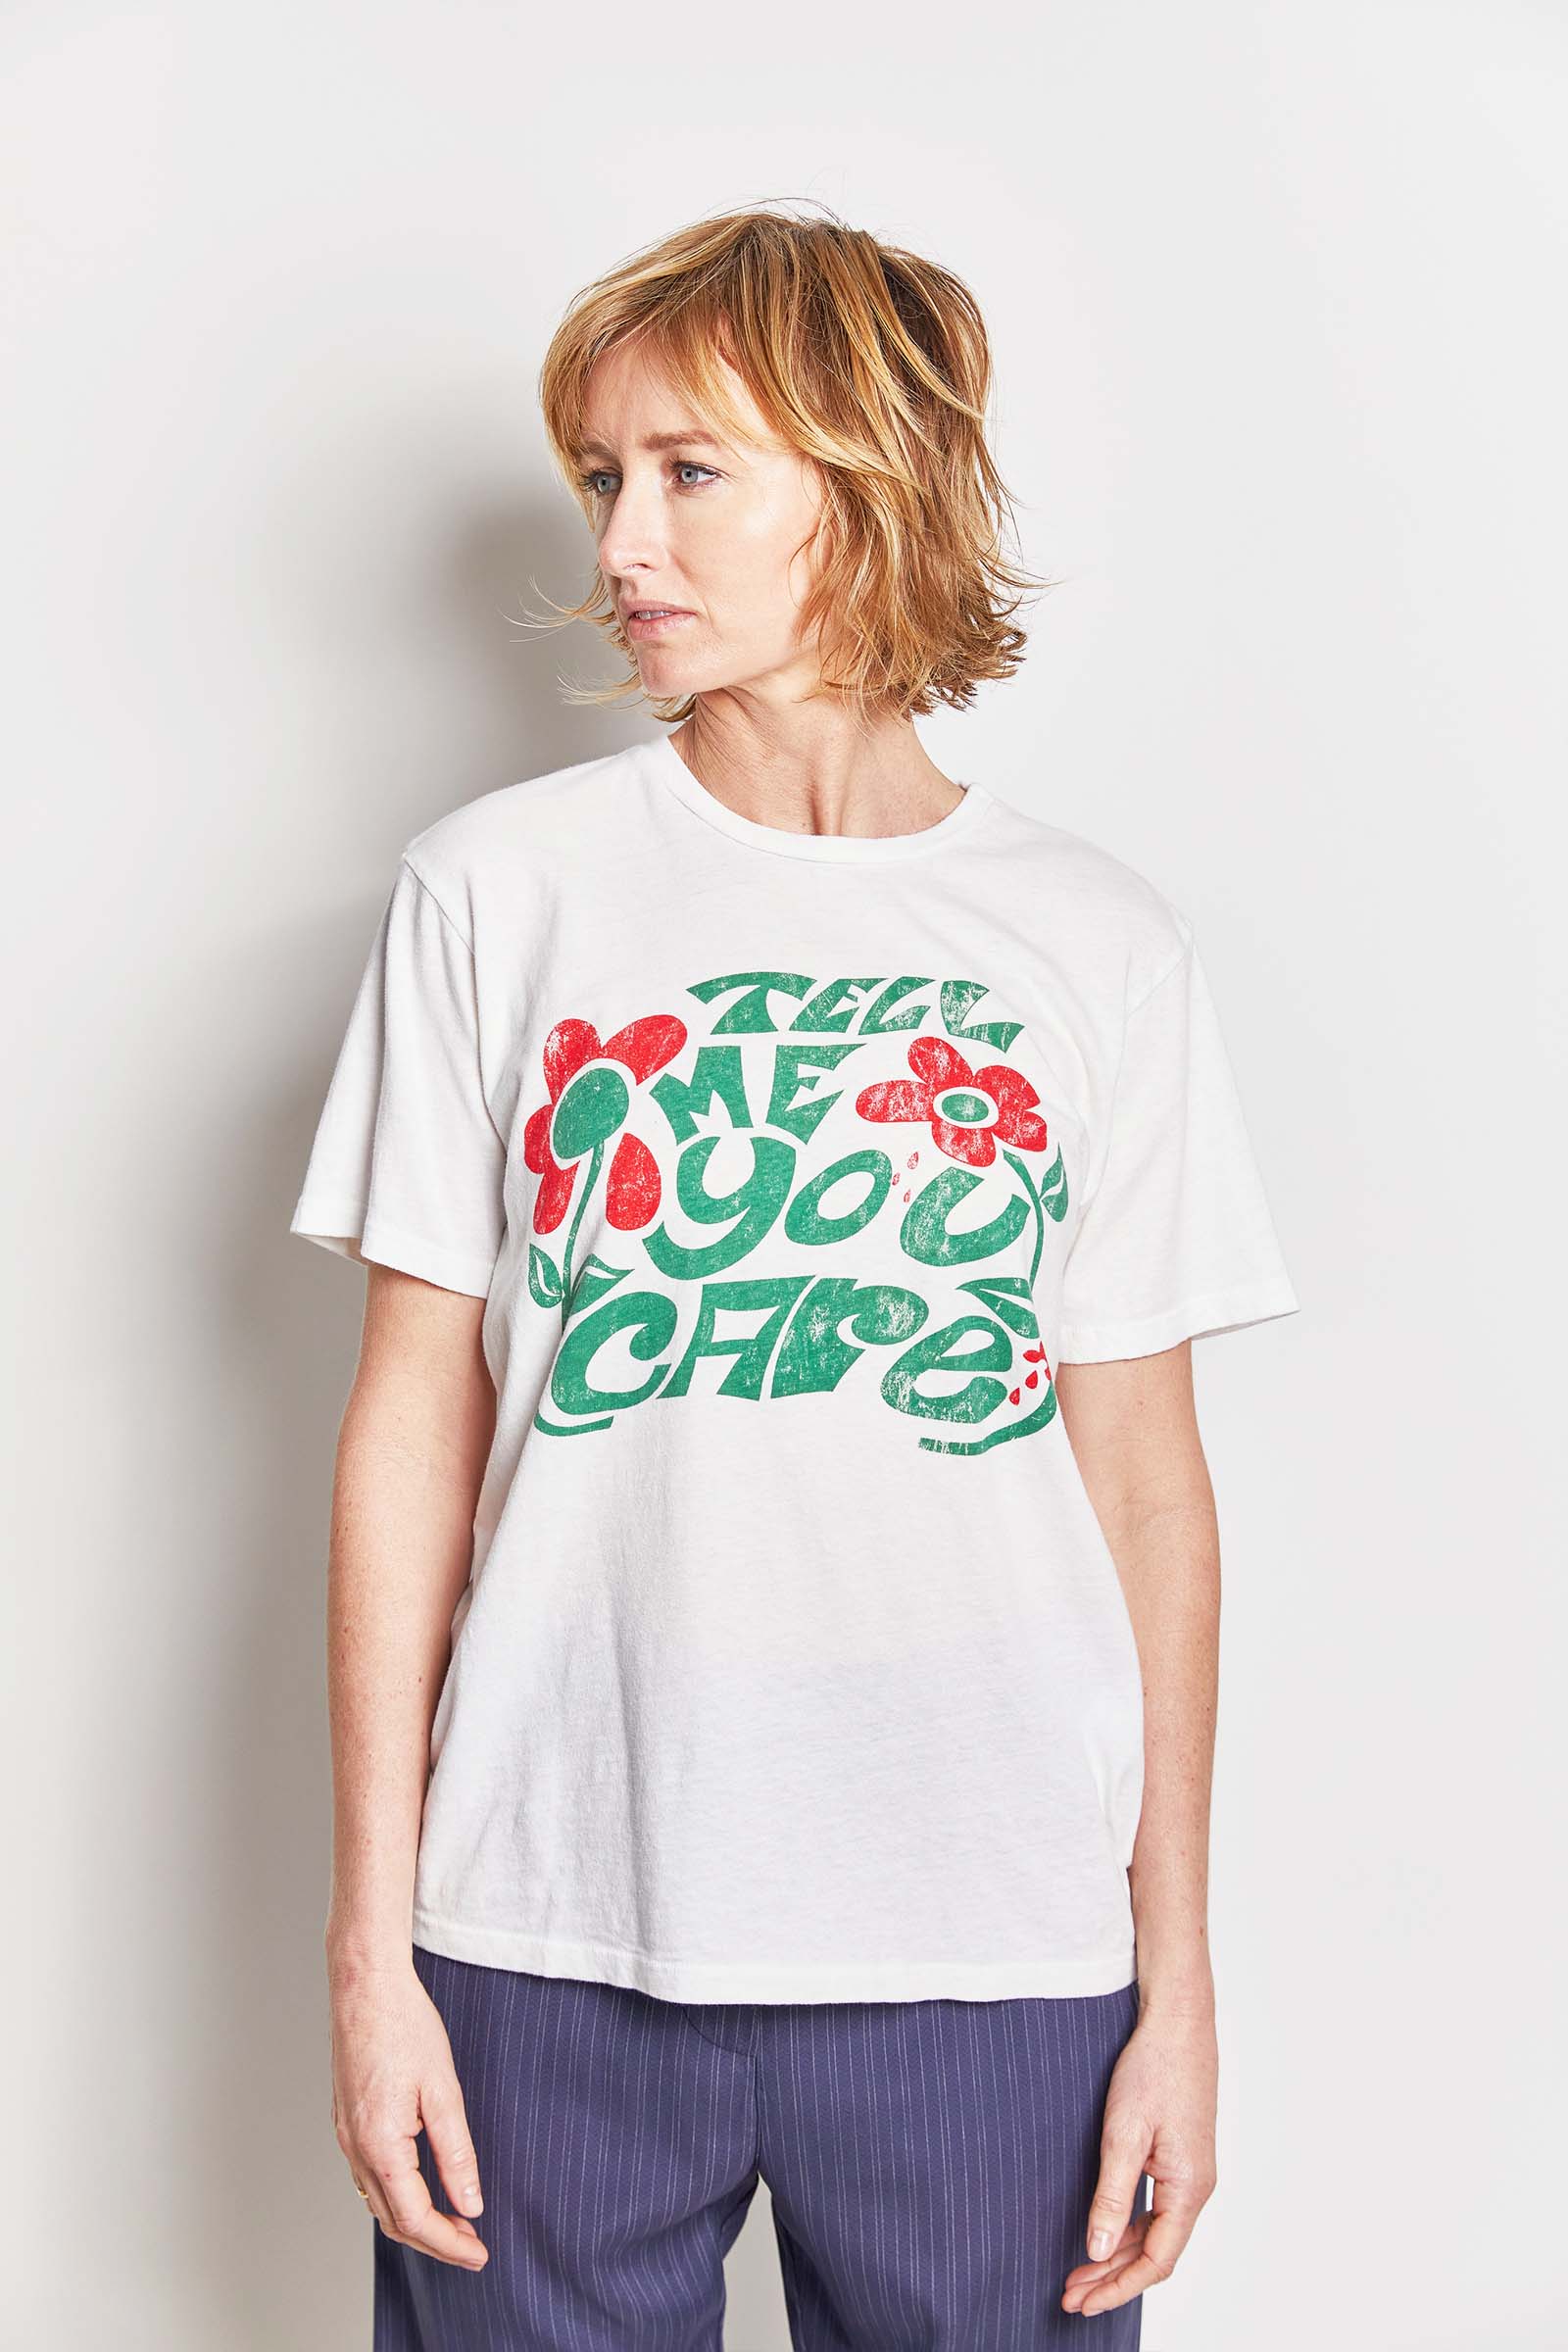 mother denim tell me you care graphic t-shirt.